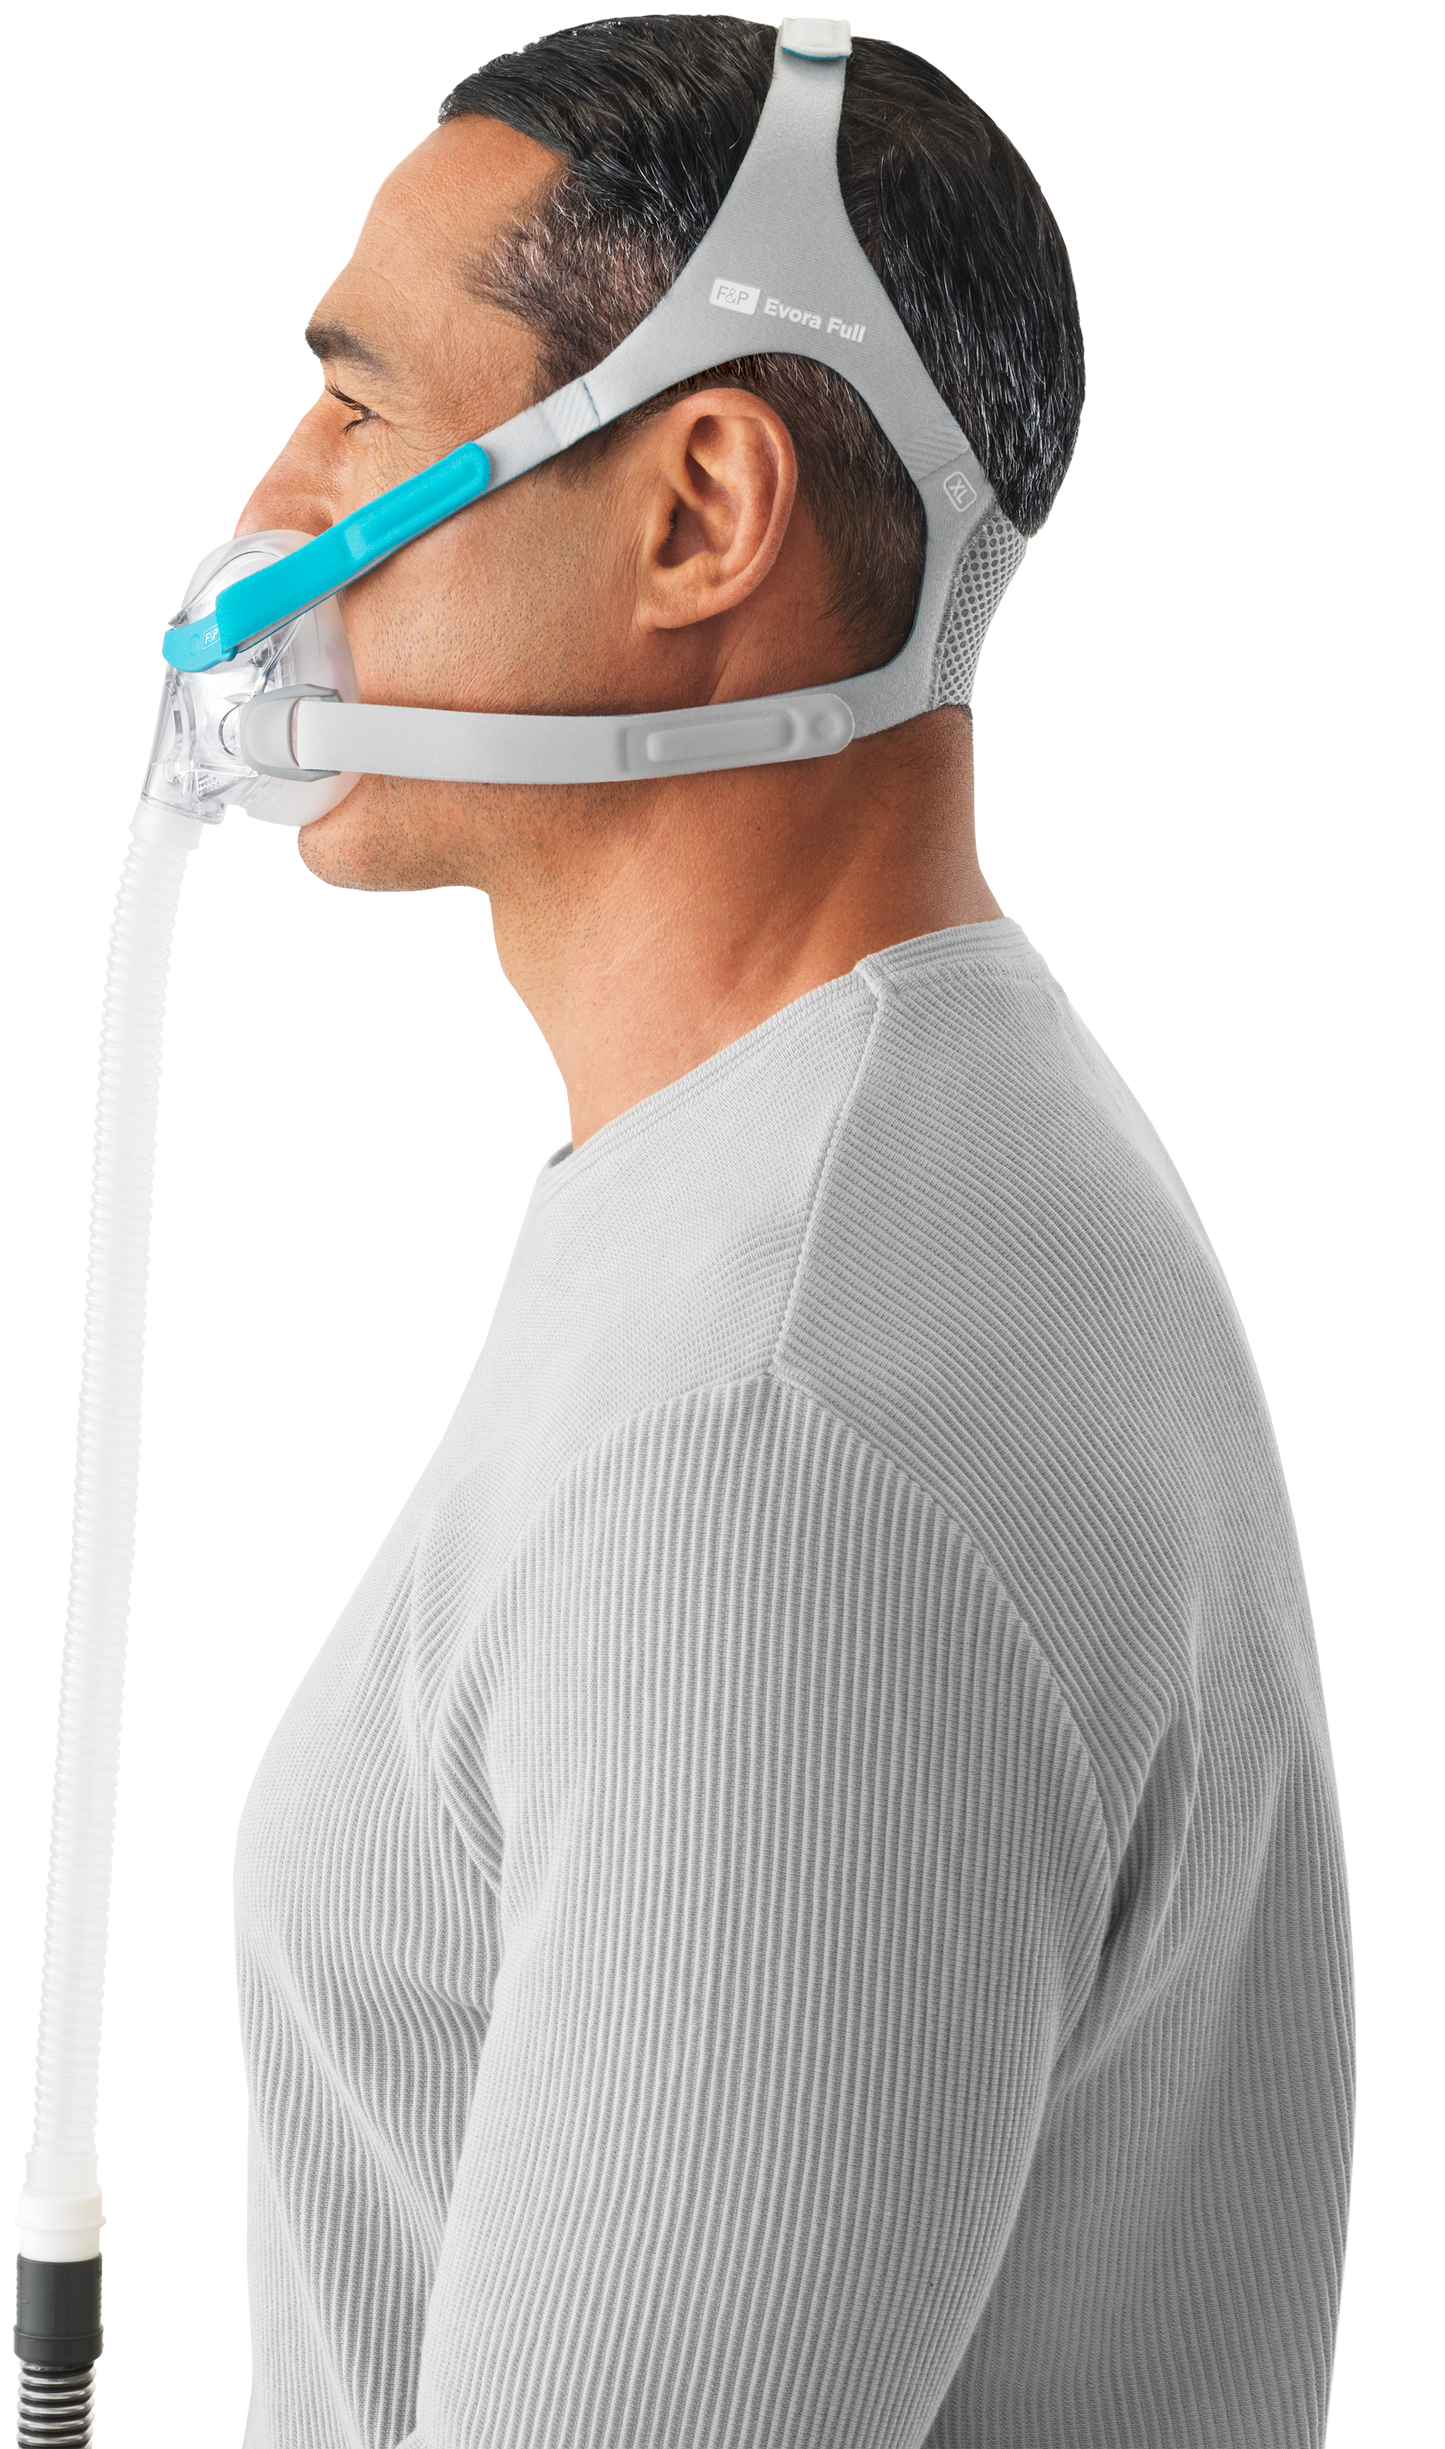 Side view of man wearing the Evora full face CPAP mask.